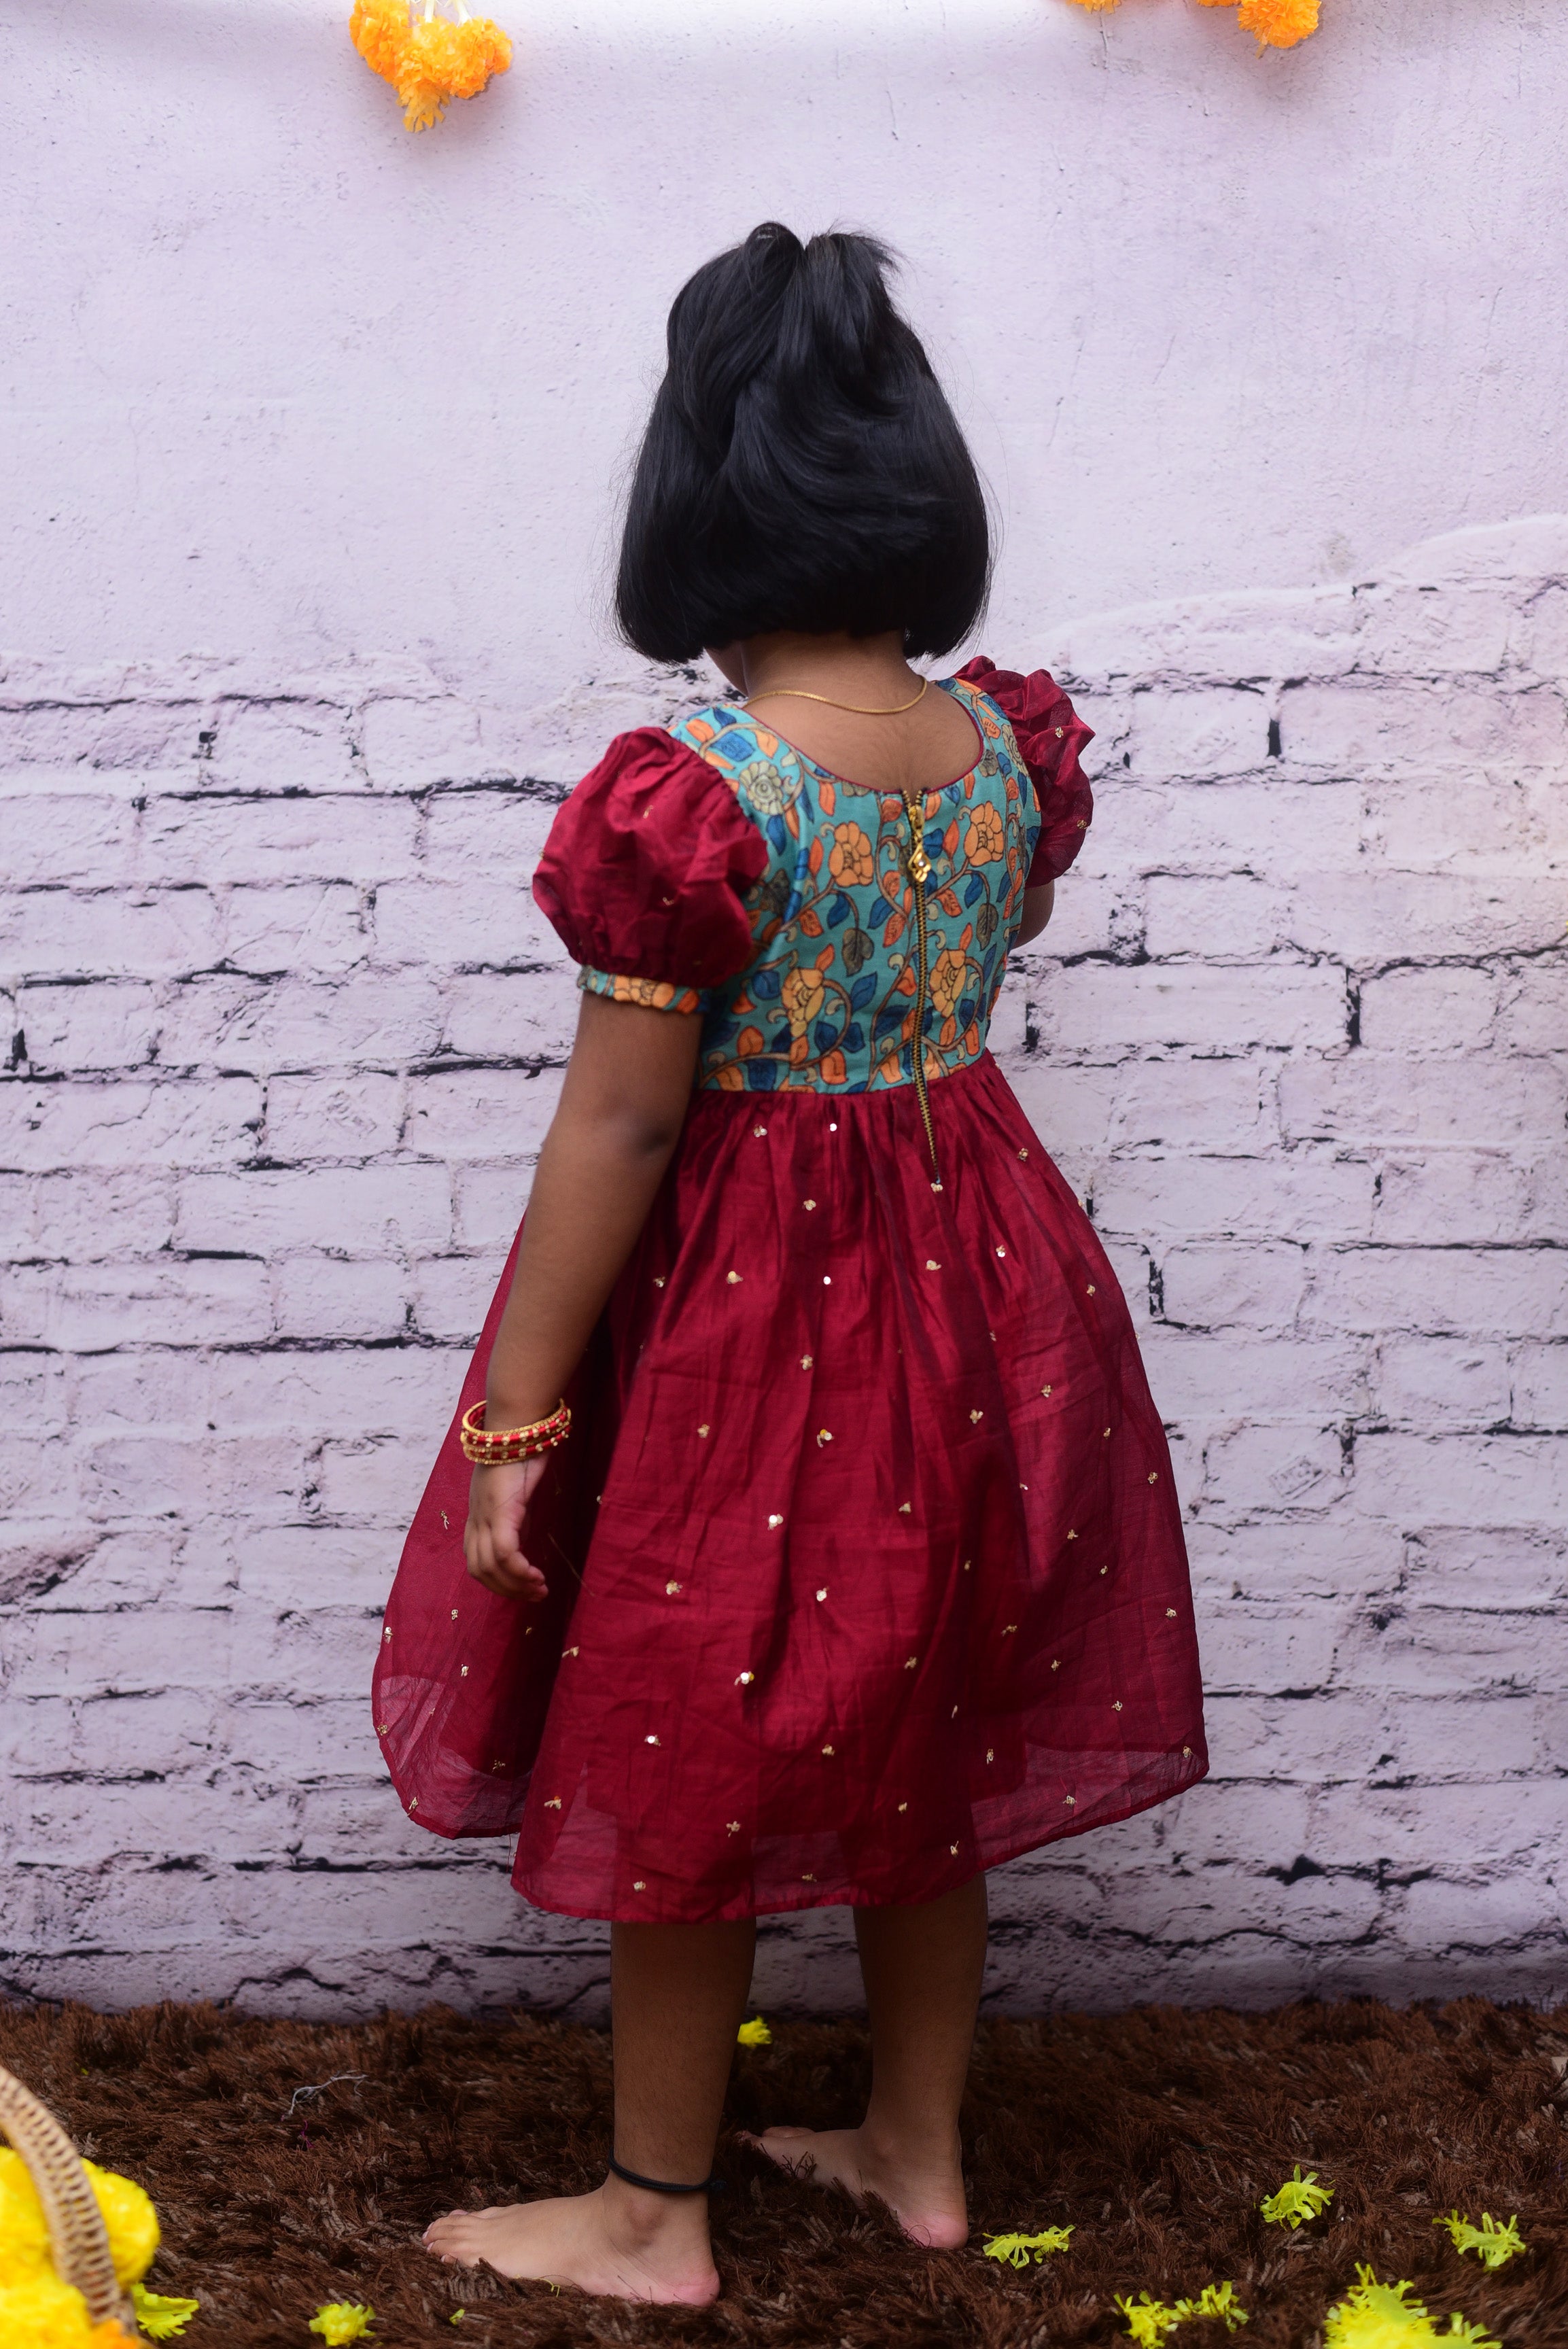 Find the perfect designer dress for your teenager with our range of beautiful sequin short frock with kalamkari yoke and puff sleeve. Perfect for parties and special occasions.